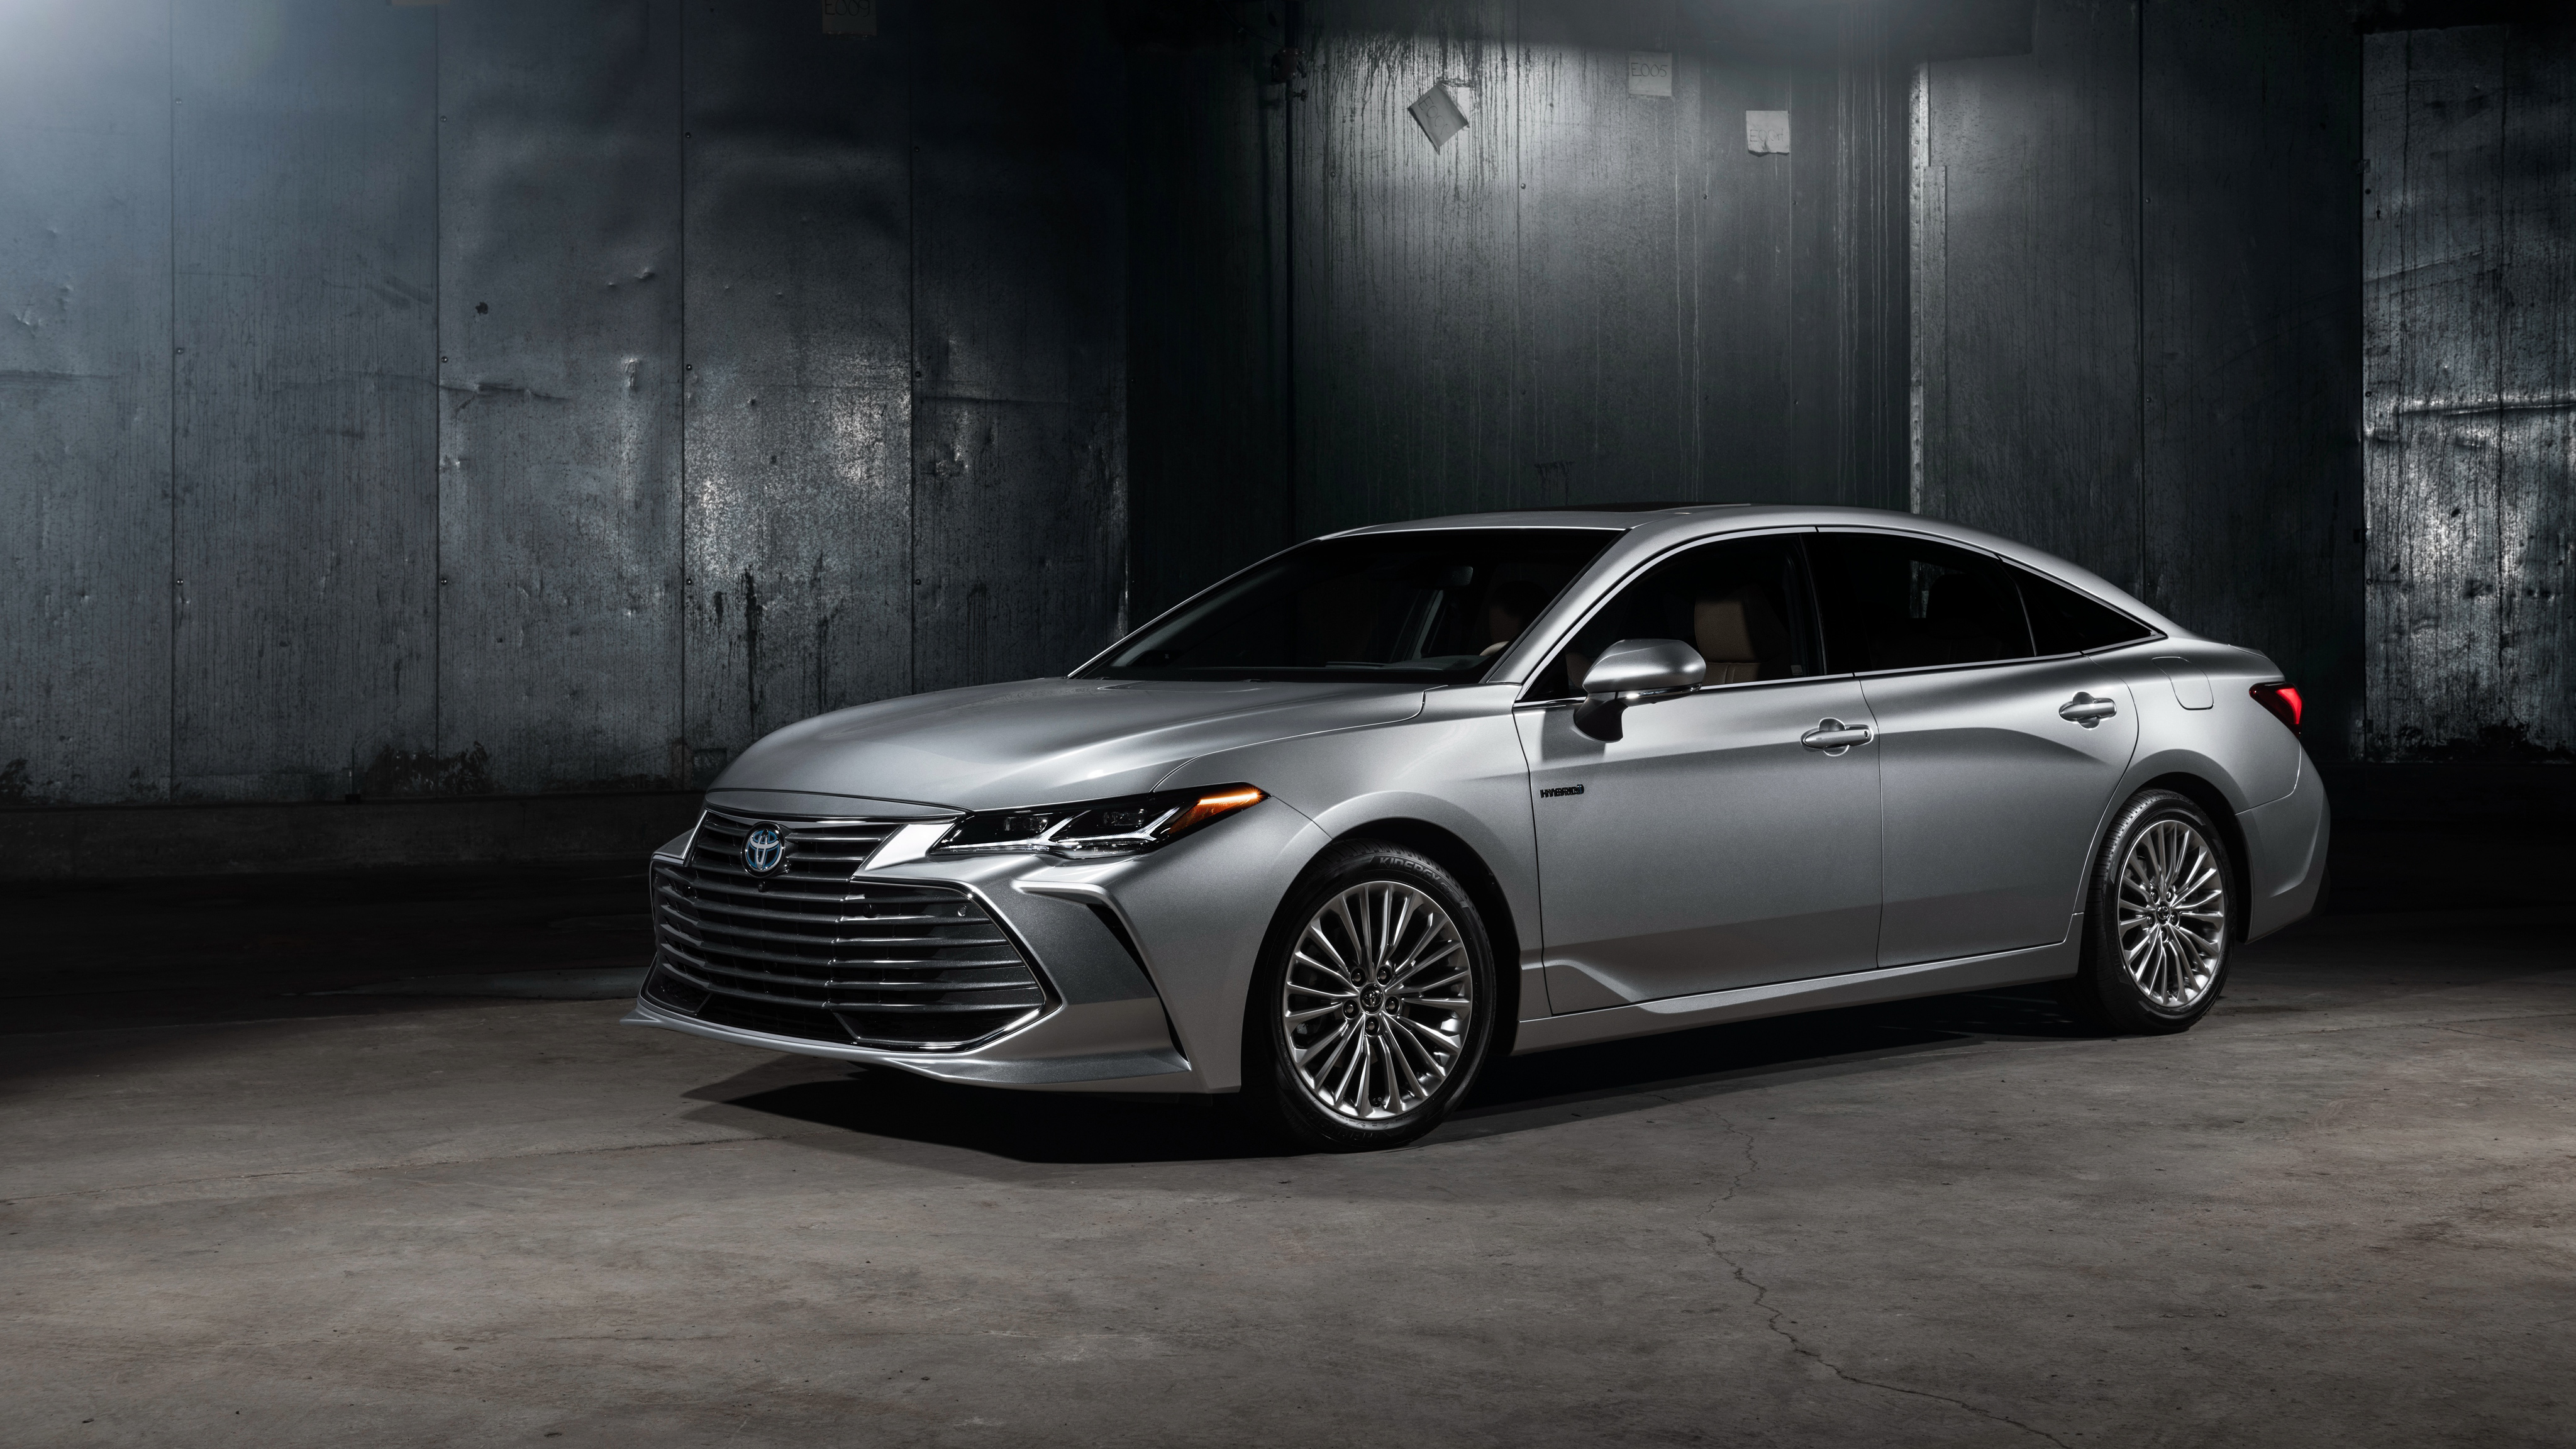 Toyota Avalon Limited Hybrid 2019 Wallpapers